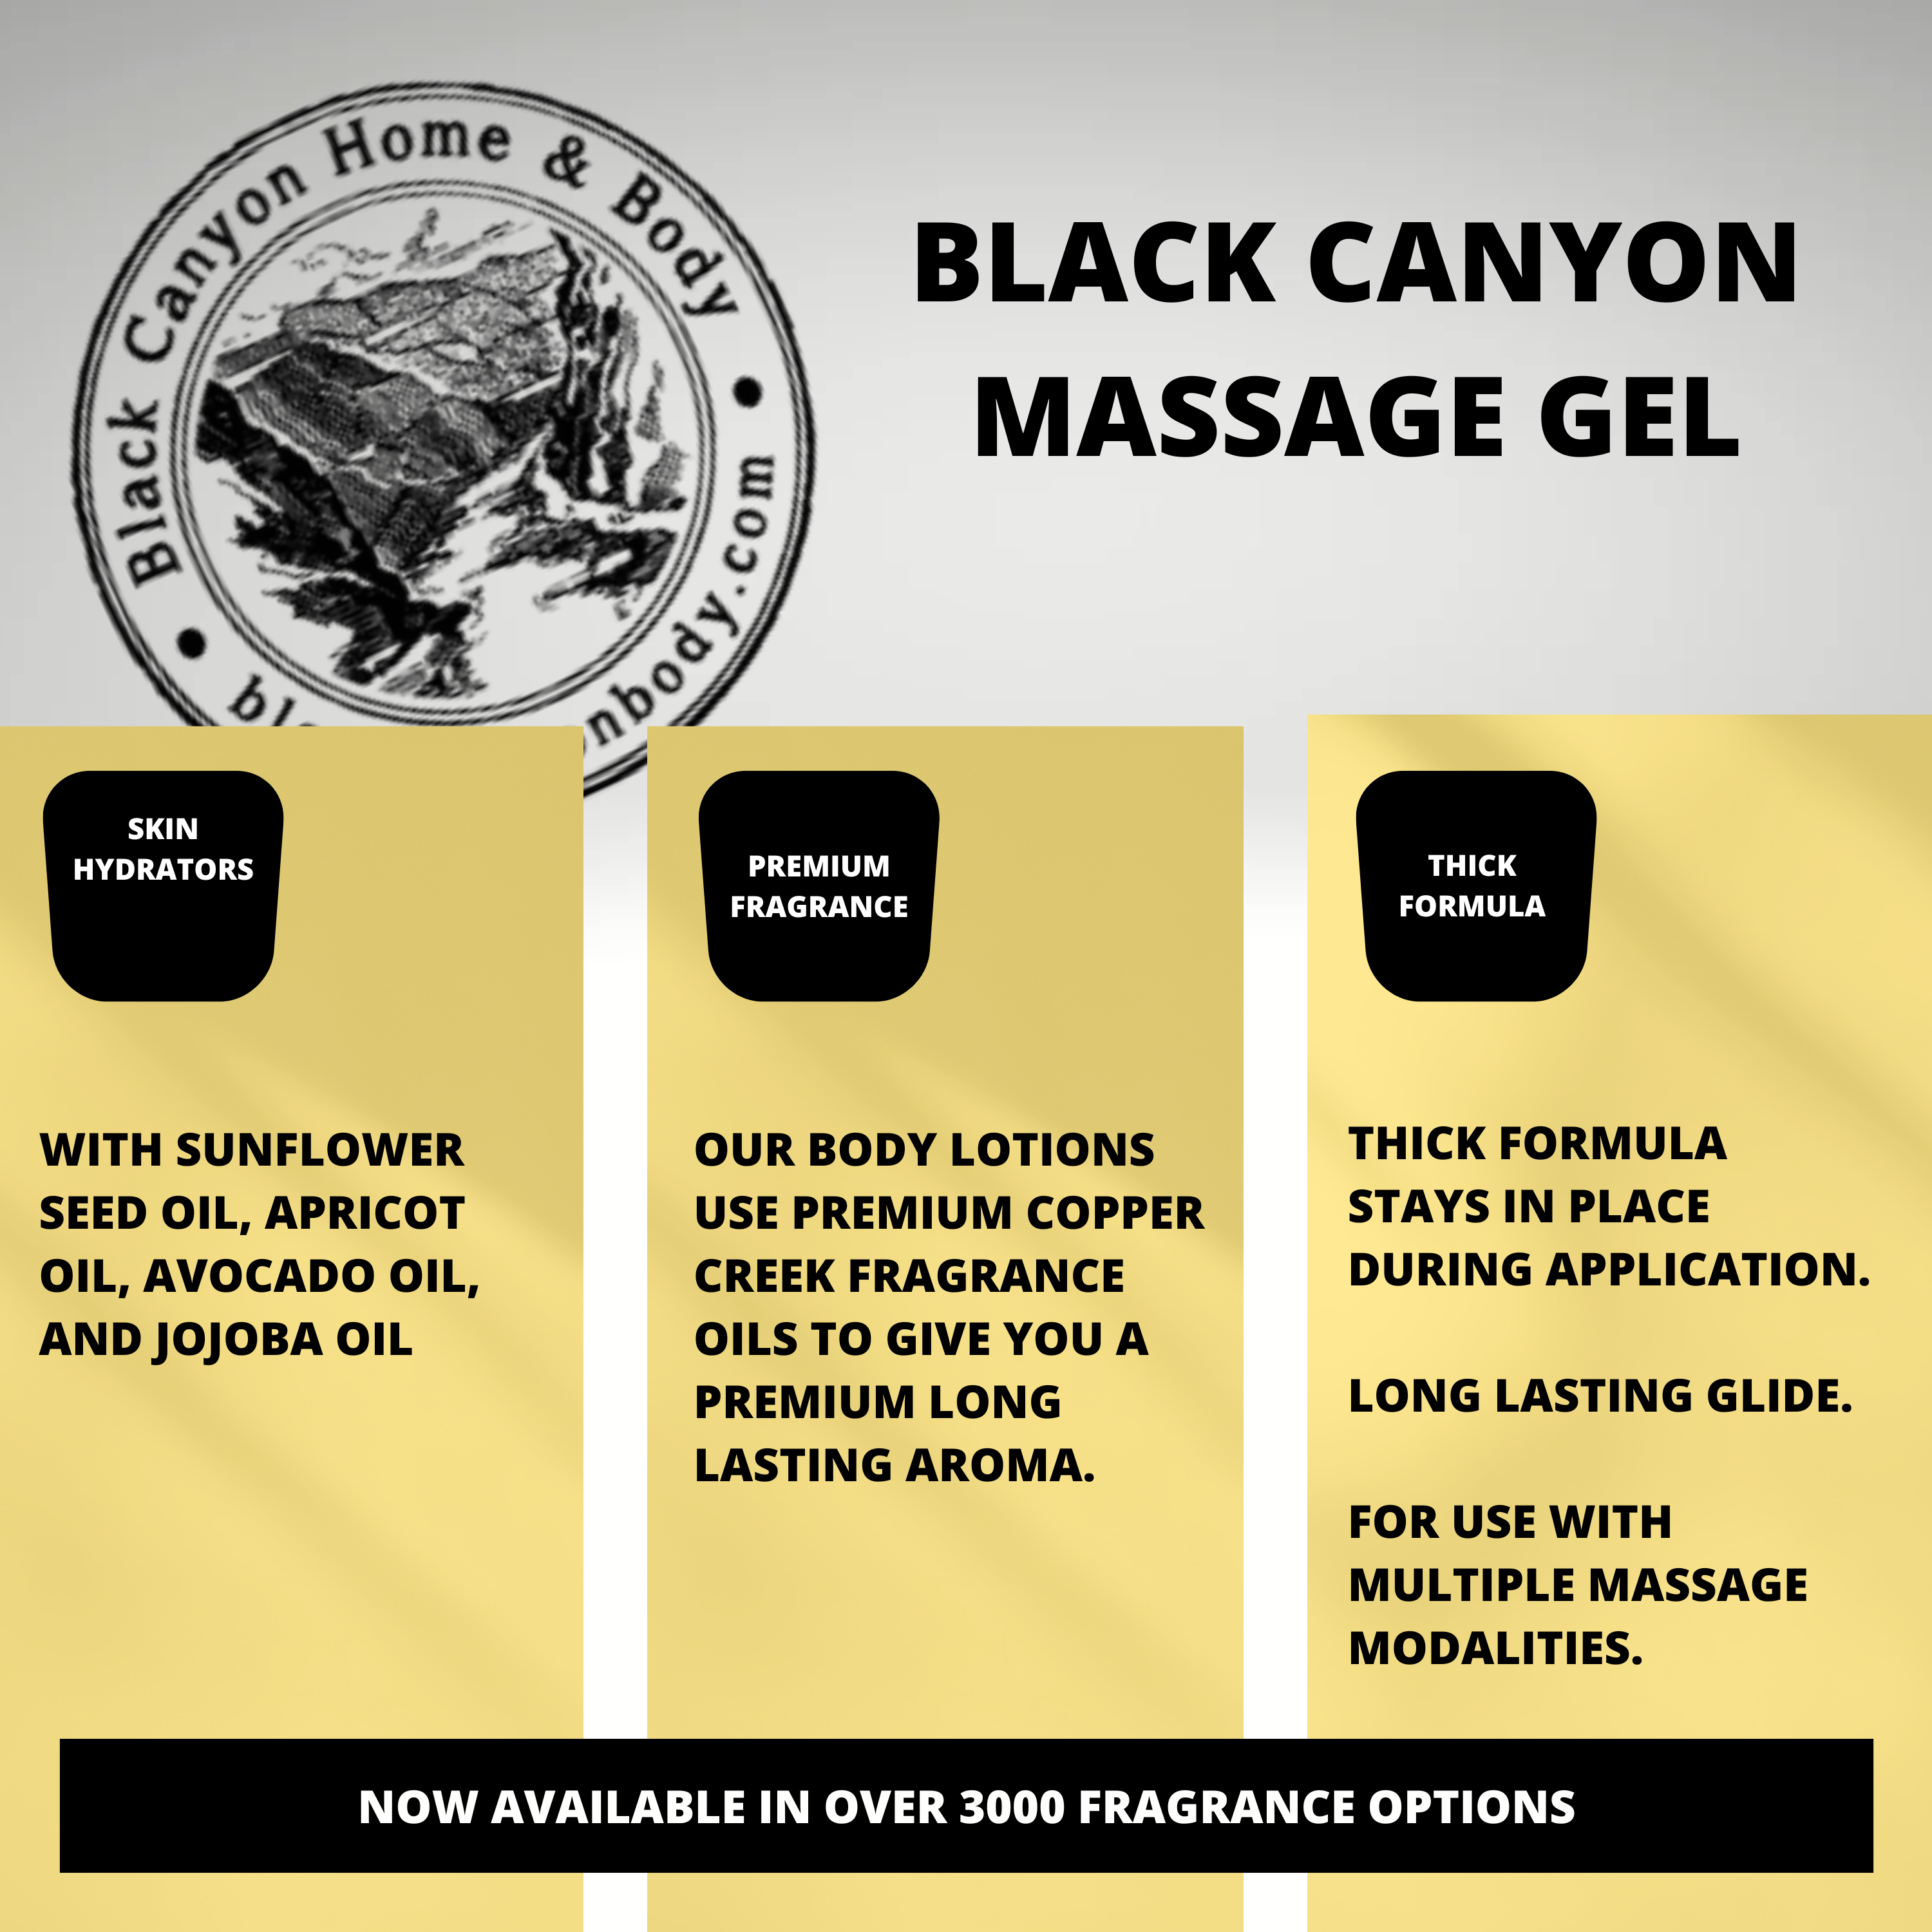 Black Canyon Berry Shortcake & Whipped Cream Scented Massage Gel